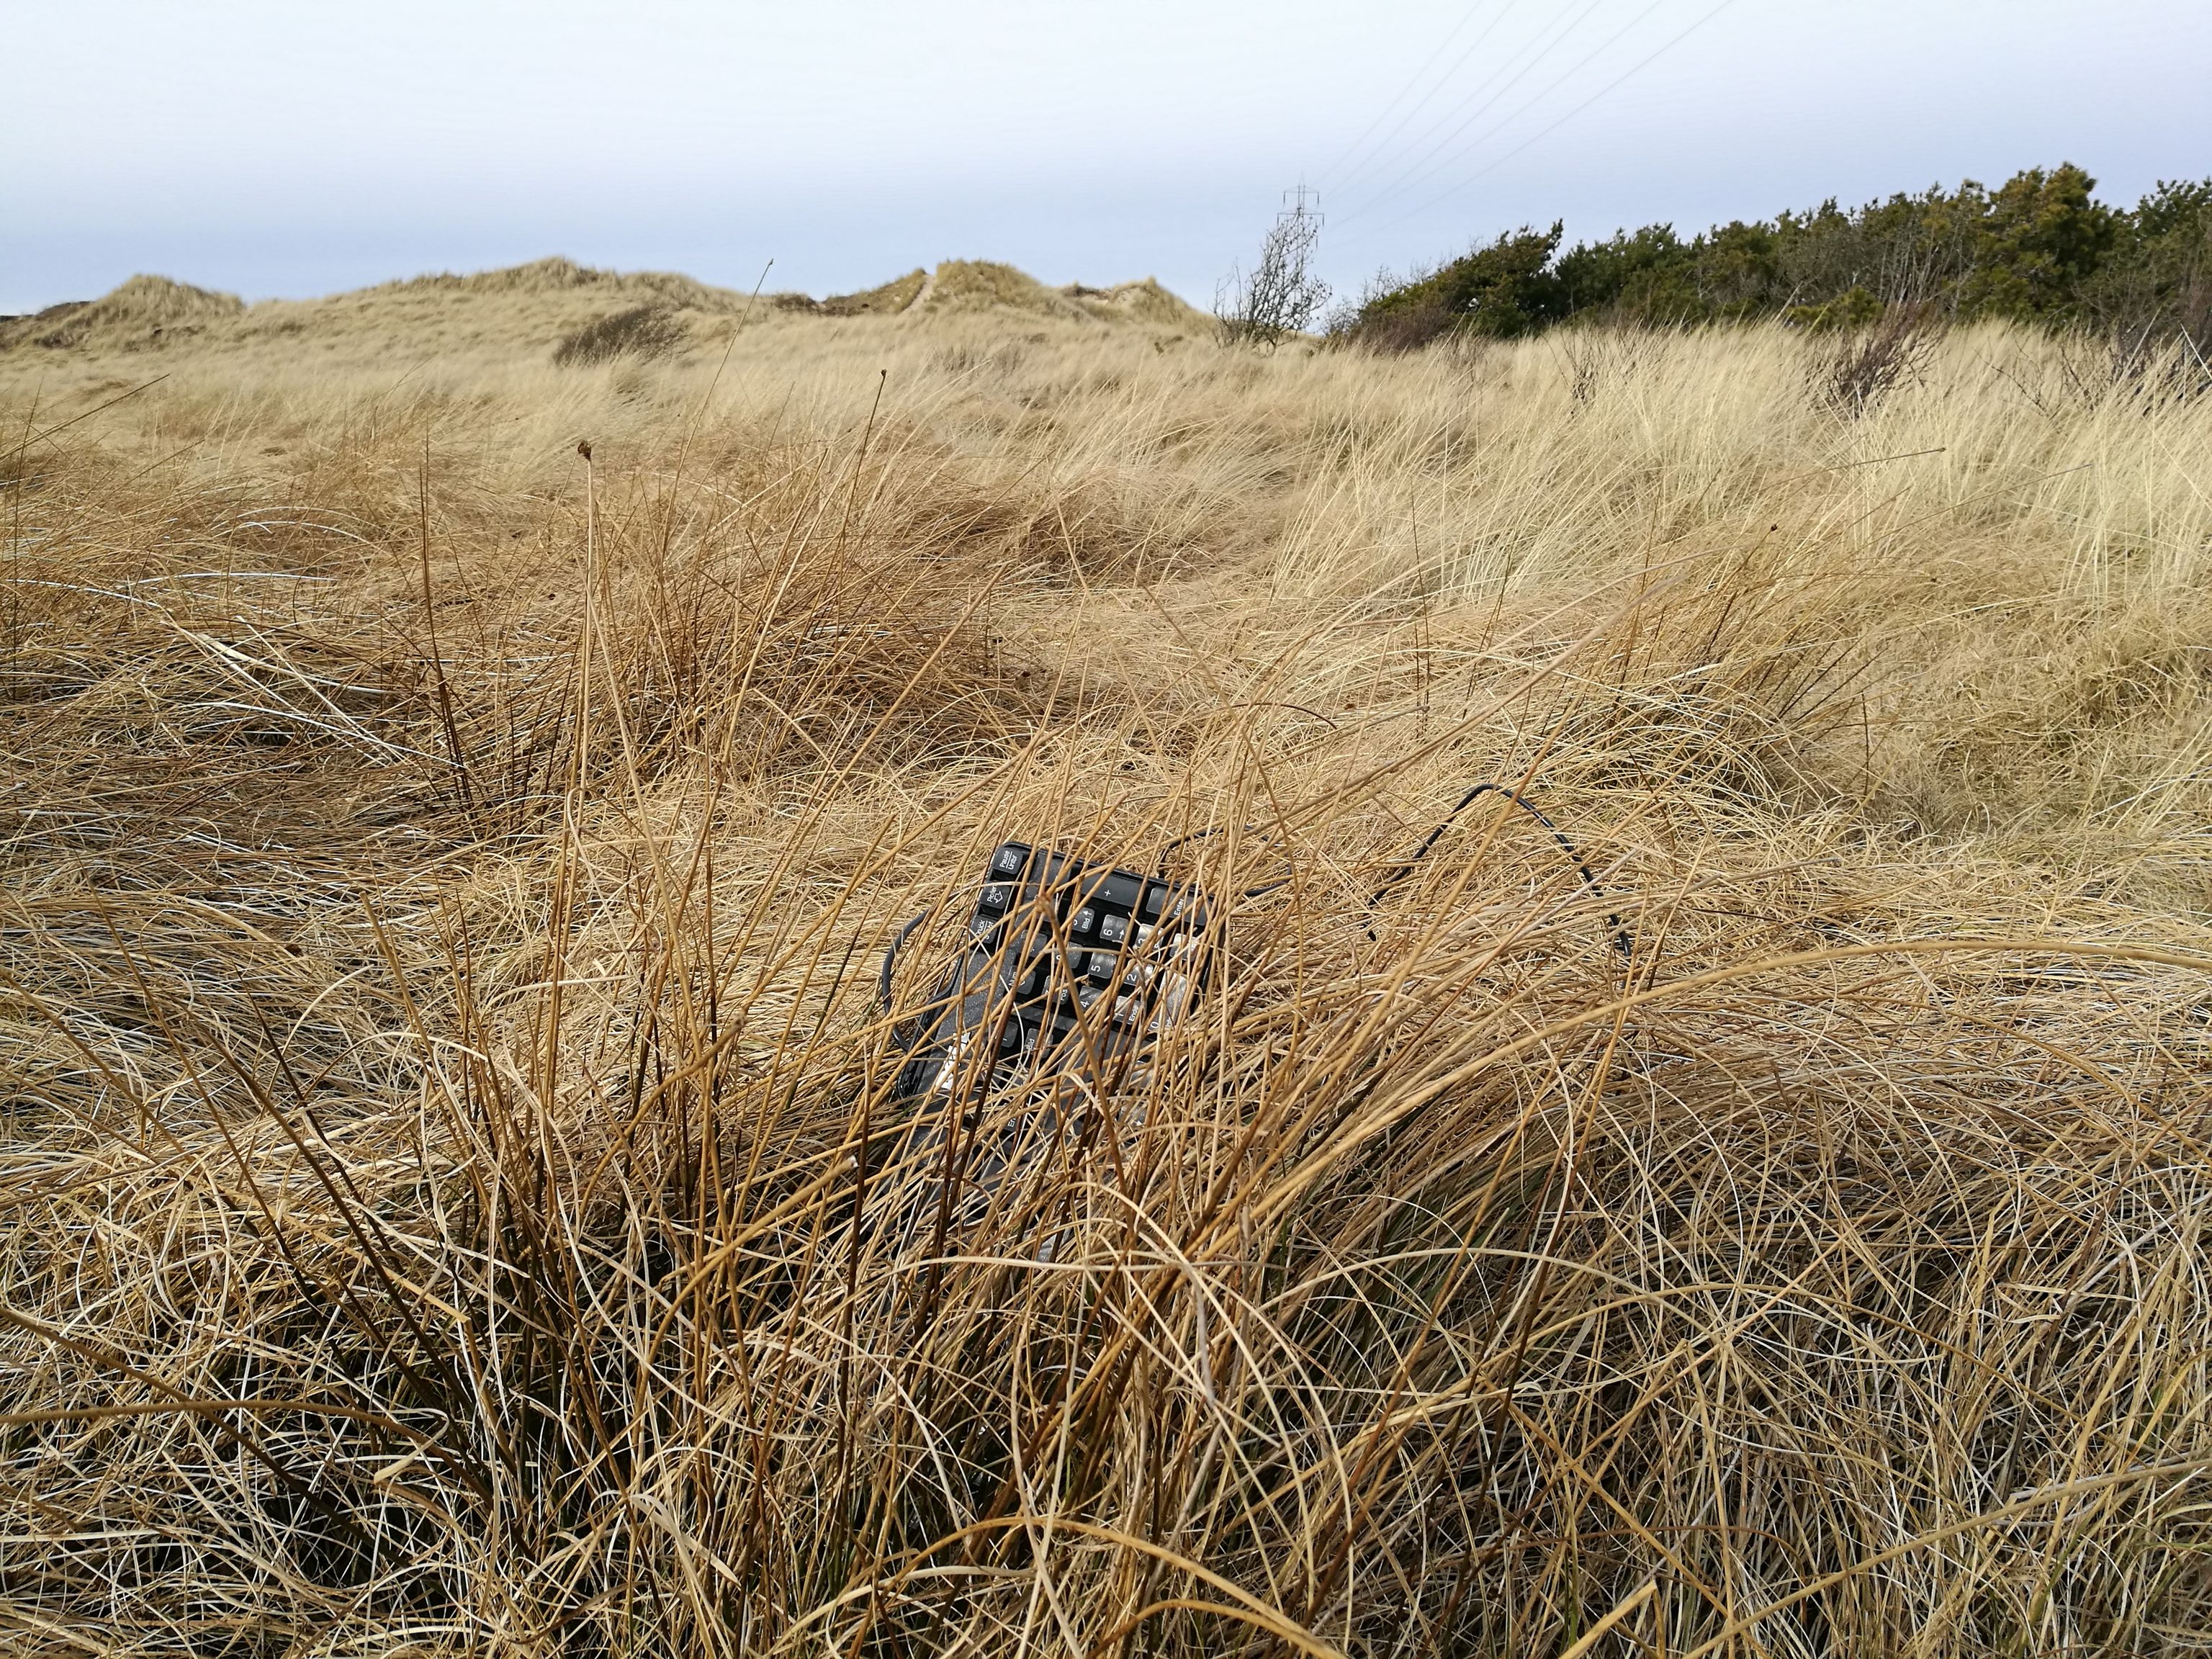 A keyboard partially hidden by deep dry grass. Dunes can be seen in the background.